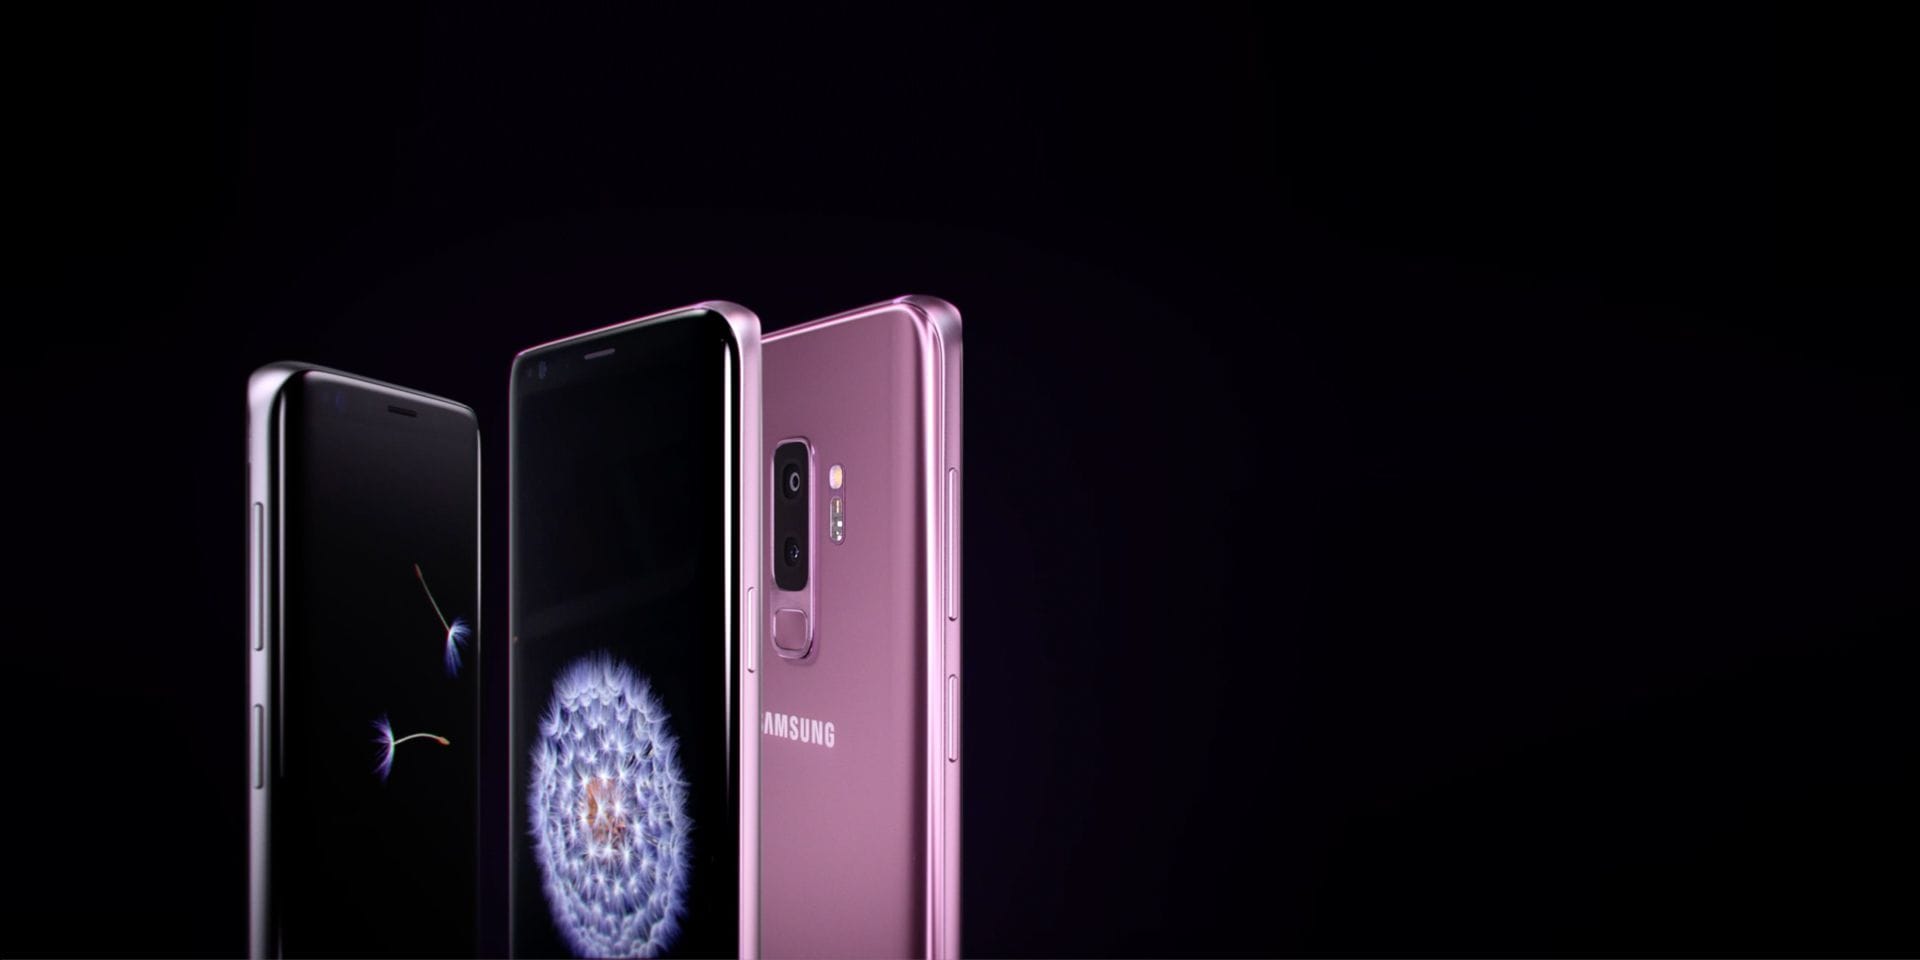 BREAKING: US Snapdragon Galaxy S9 root access achieved via SamPWND, public release soon